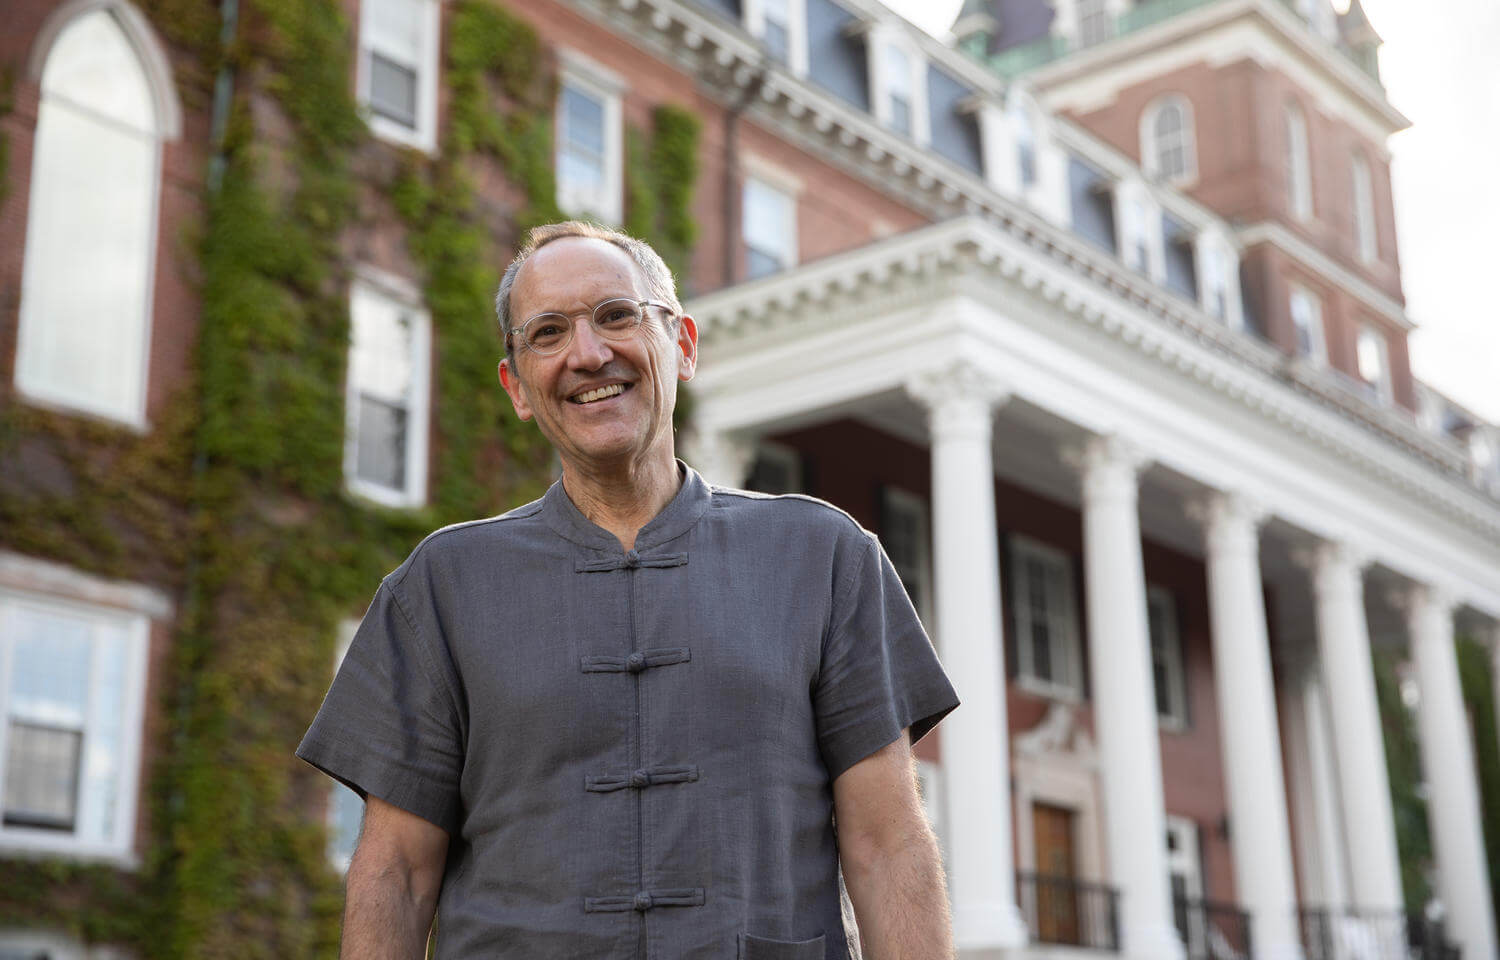 Professor stands in front of brick building with a white porch.